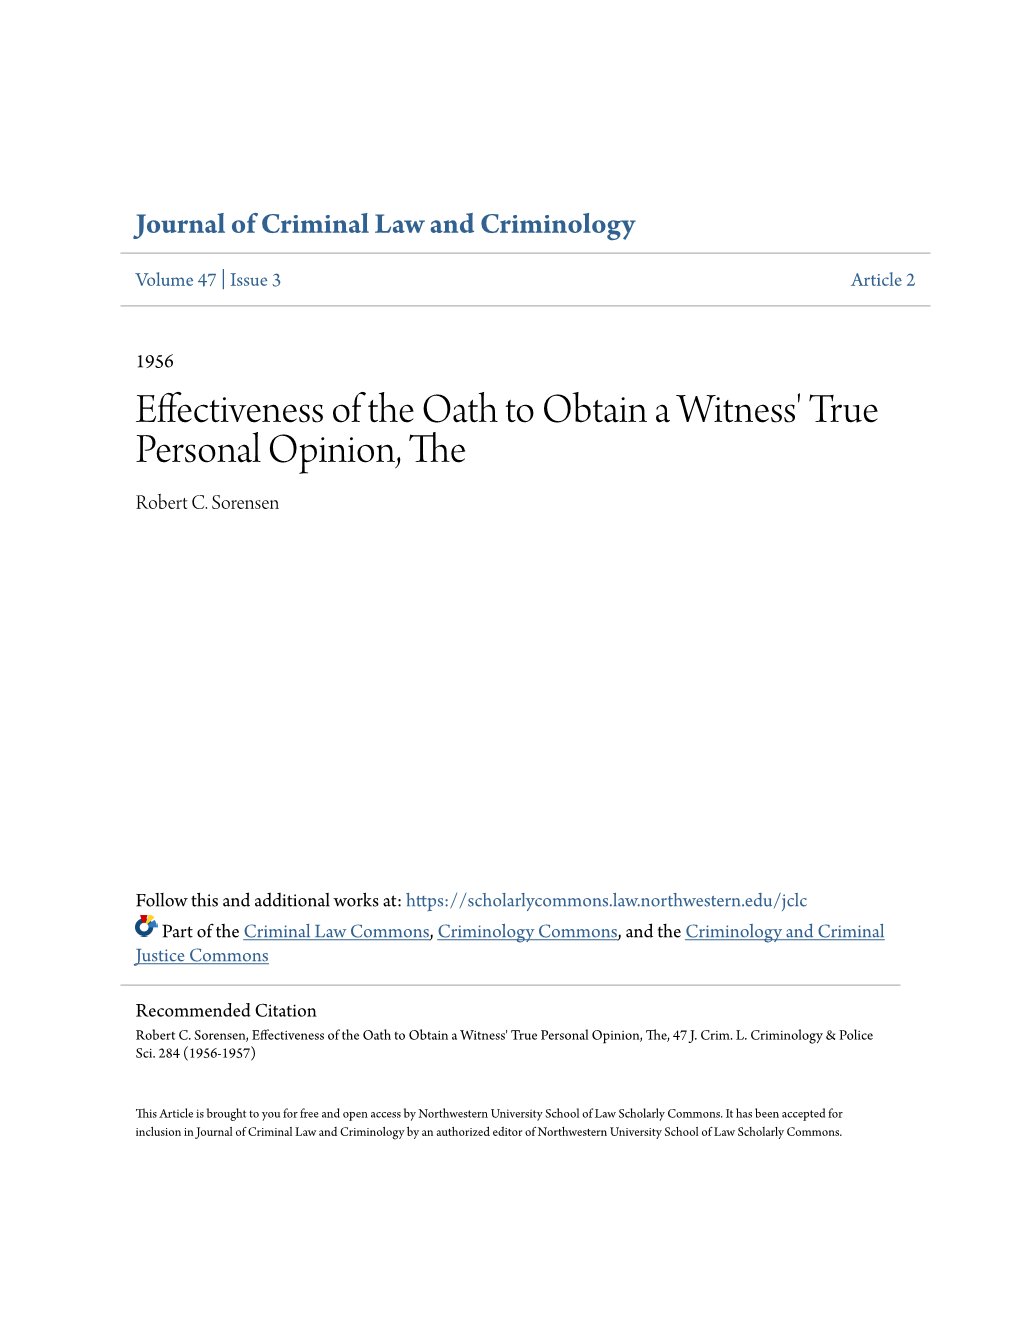 Effectiveness of the Oath to Obtain a Witness' True Personal Opinion, the Robert C